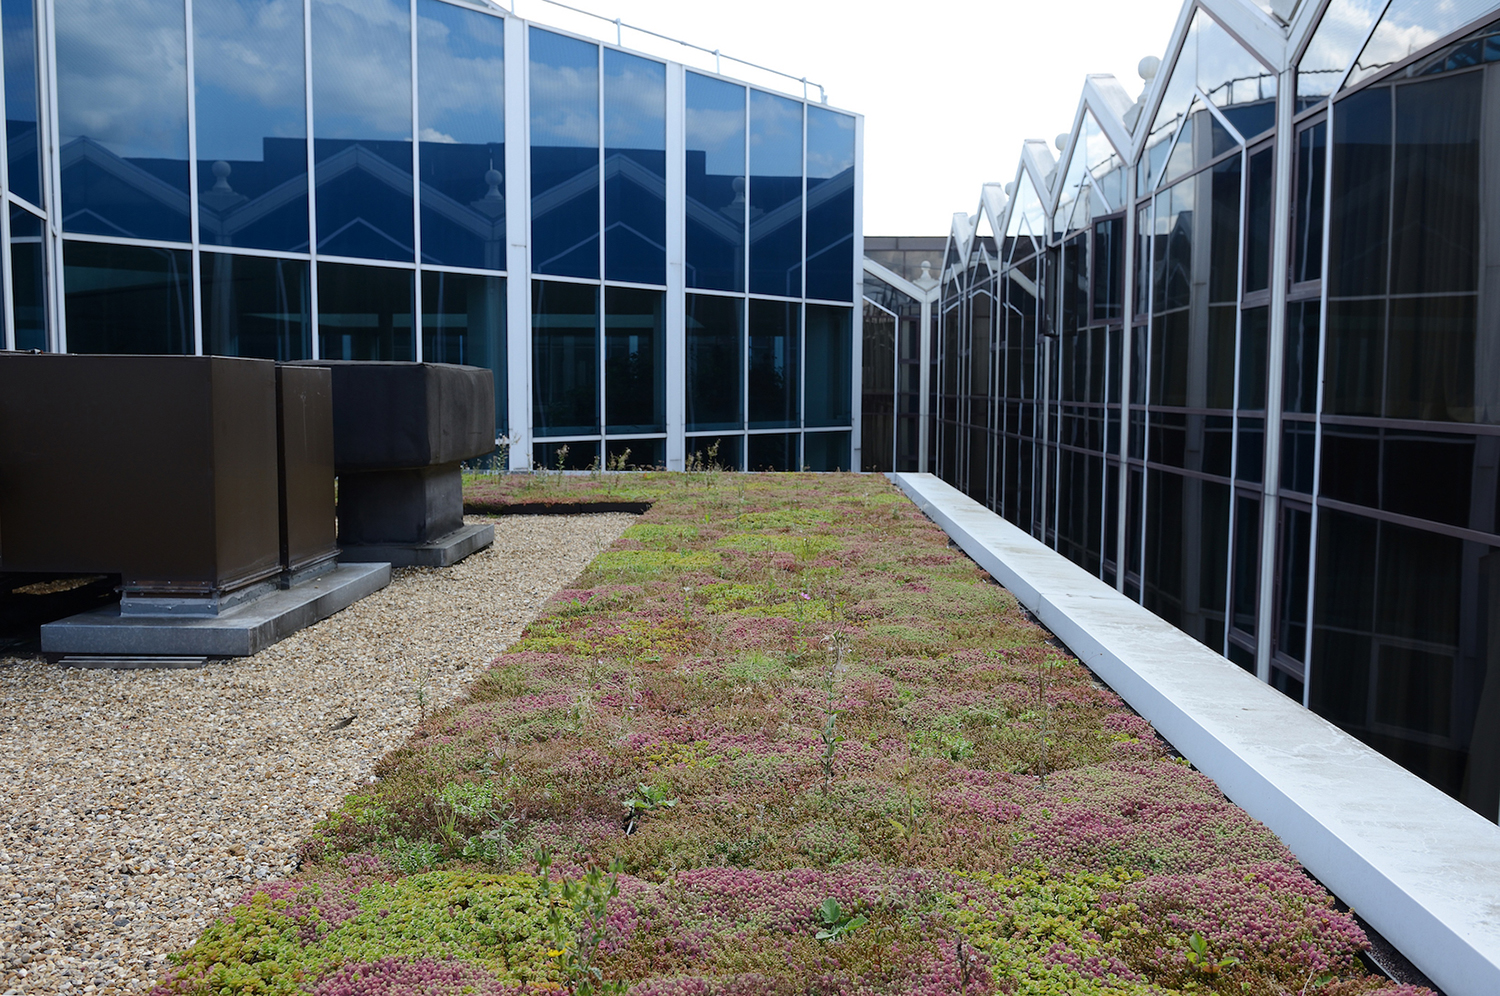 The appliance of science delivers modular green roof success